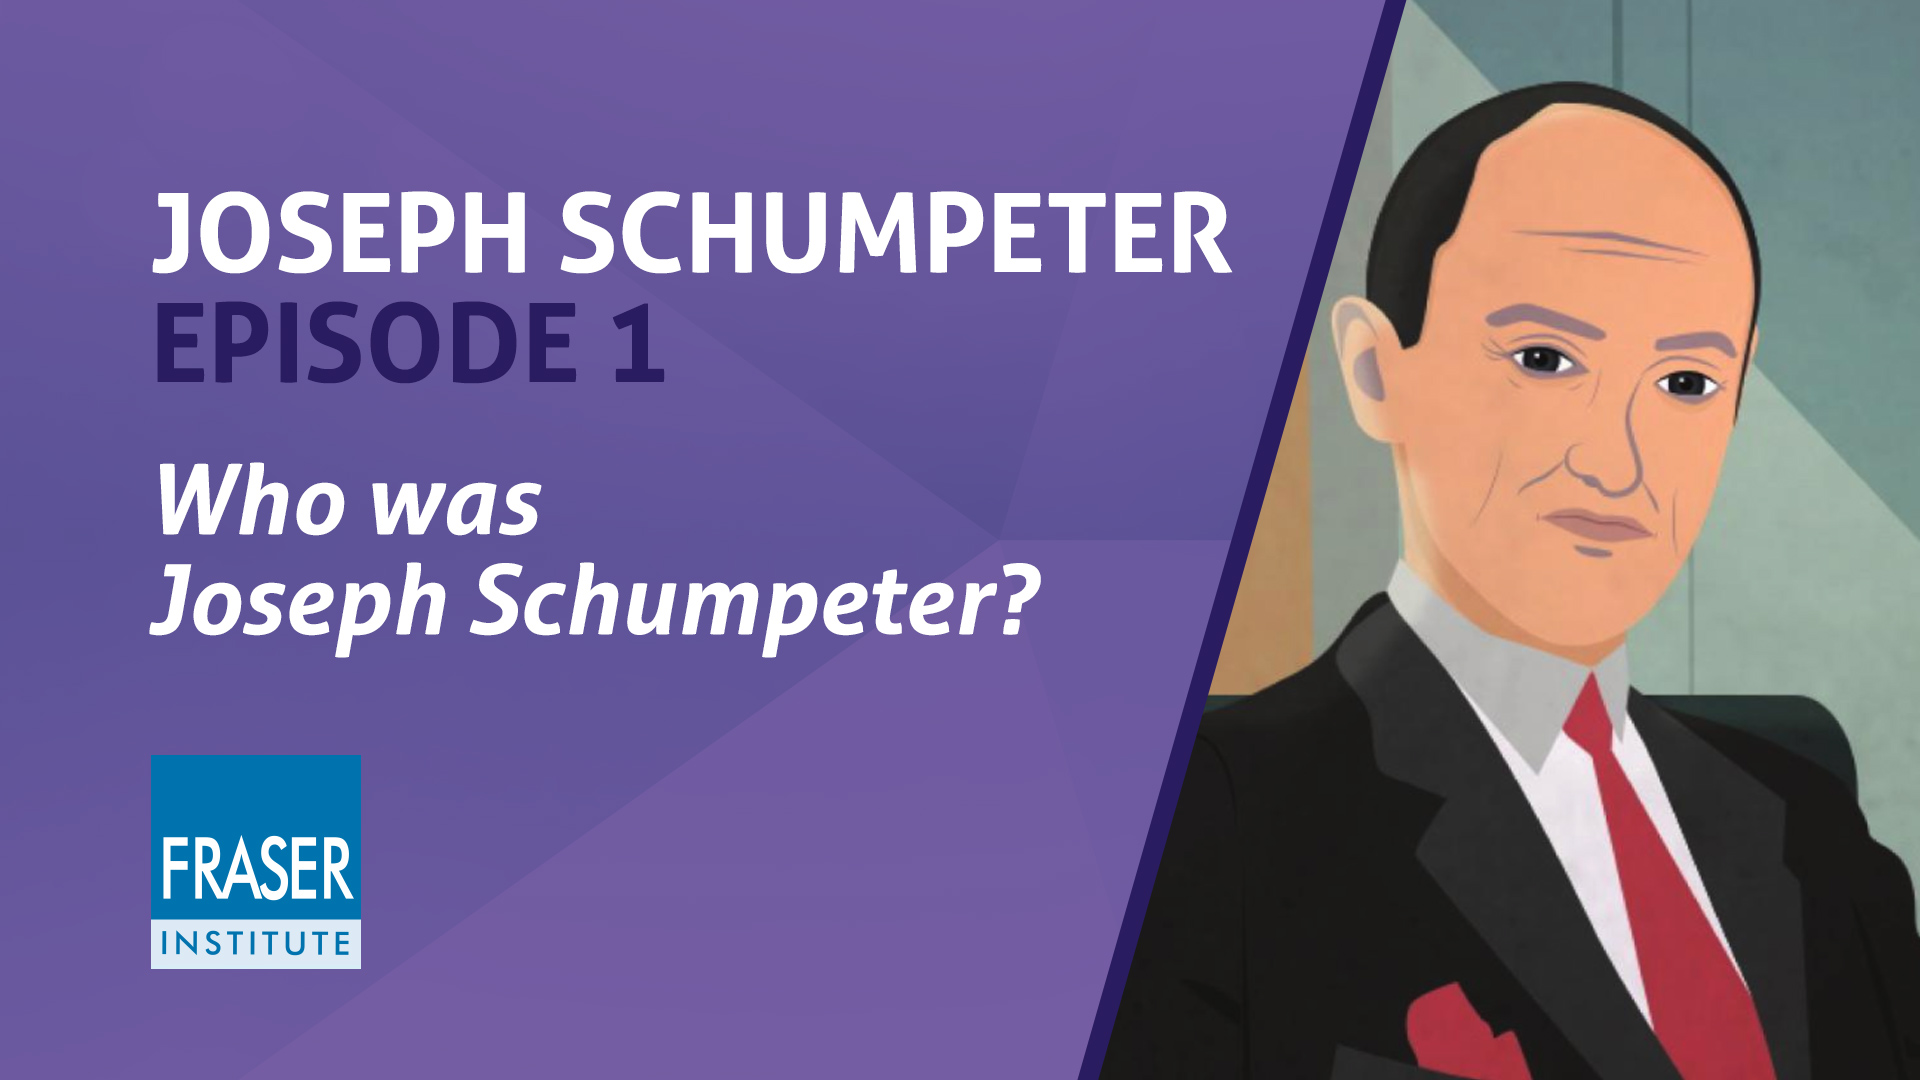 Who was Joseph Schumpeter?